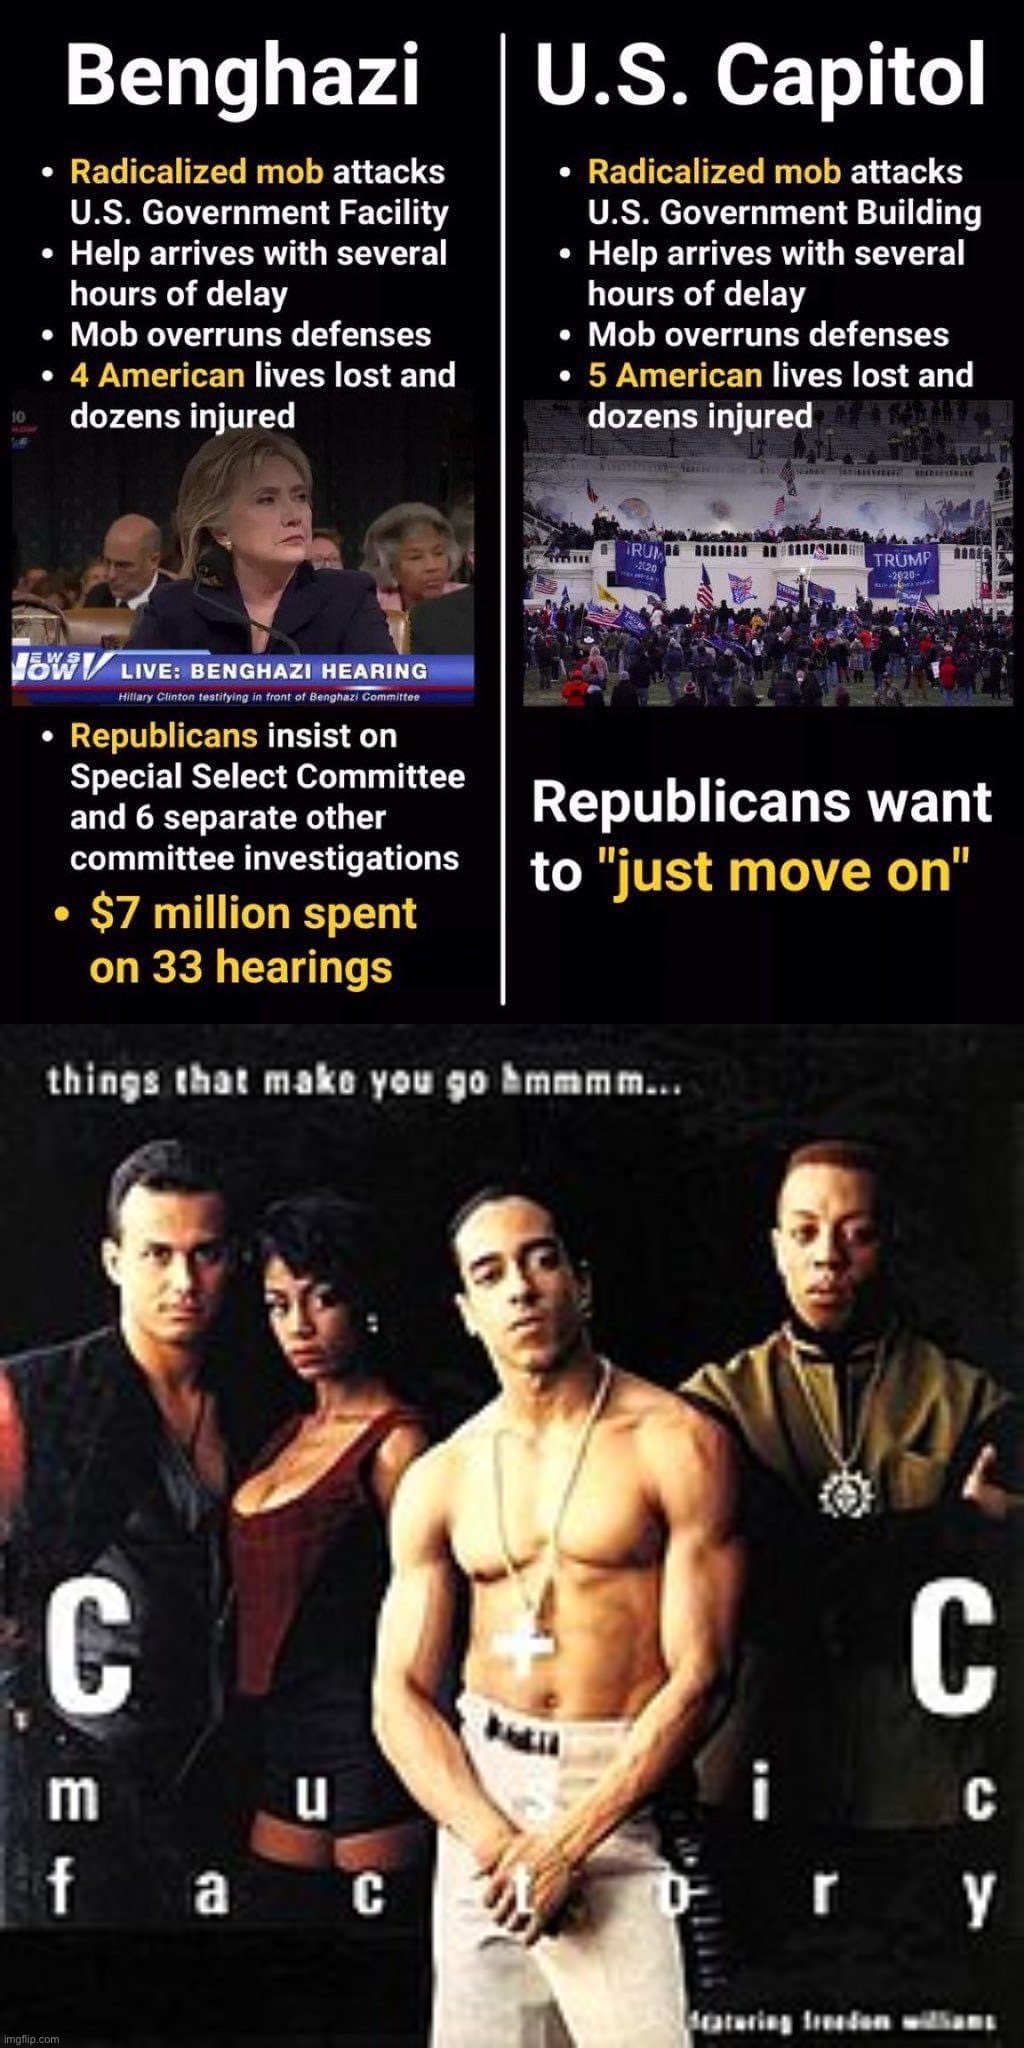 I wonder what could possibly explain this | image tagged in benghazi vs jan 6 hearings,things that make you go hmmm,islamophobia,capitol hill,riot,conservative hypocrisy | made w/ Imgflip meme maker